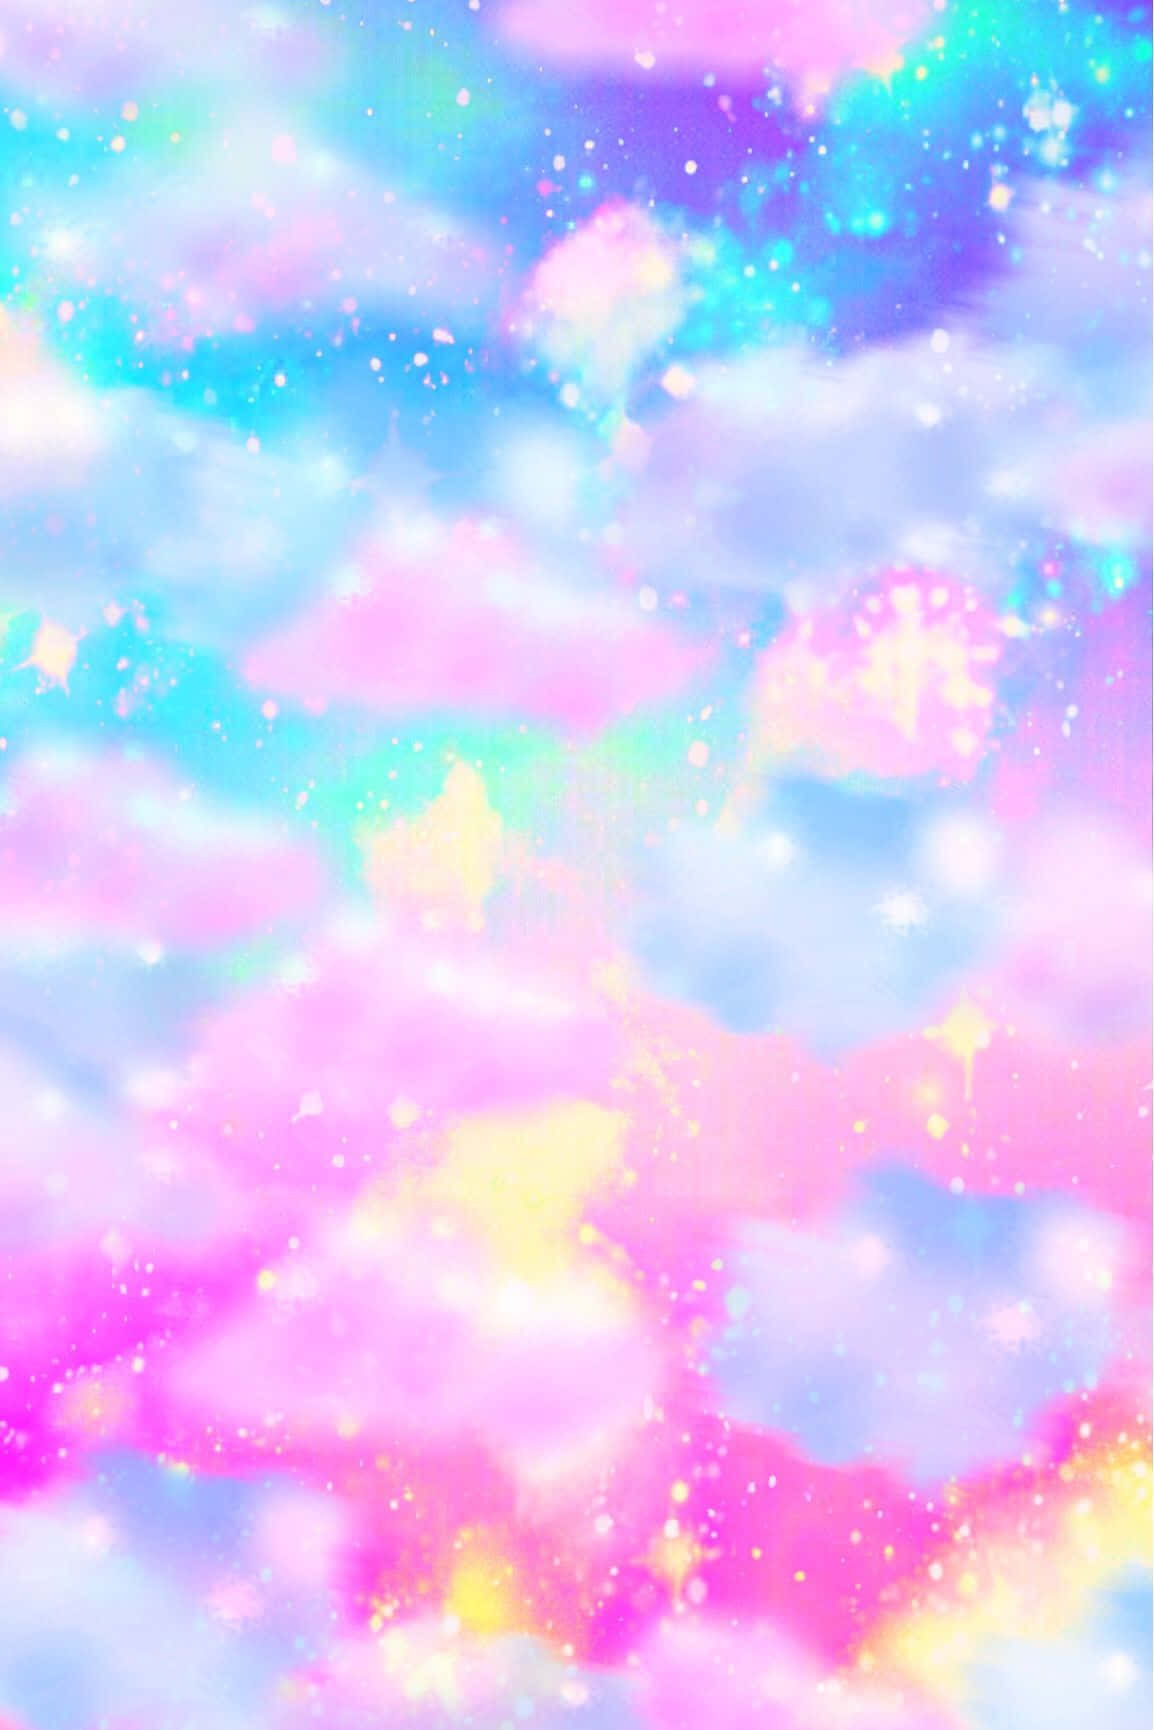 A Pink And Blue Sky With Stars And Clouds Wallpaper